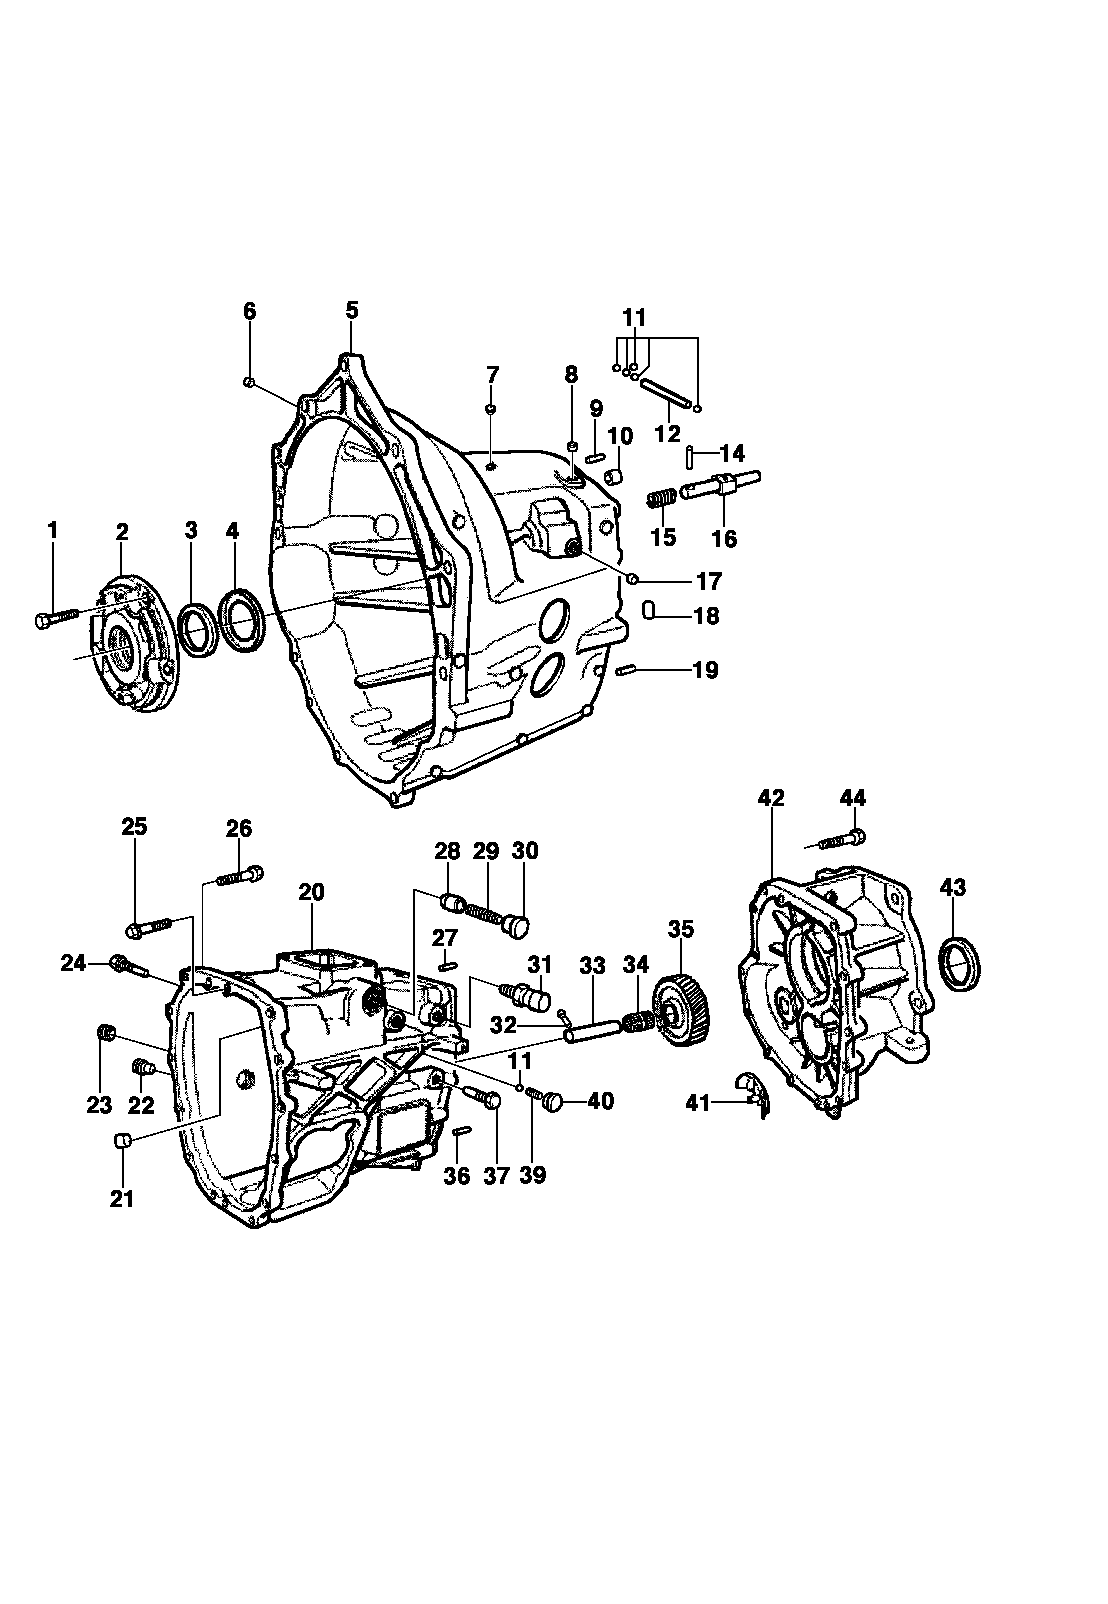 Transmission housing and components - engines LG3/LJ6 - year 200